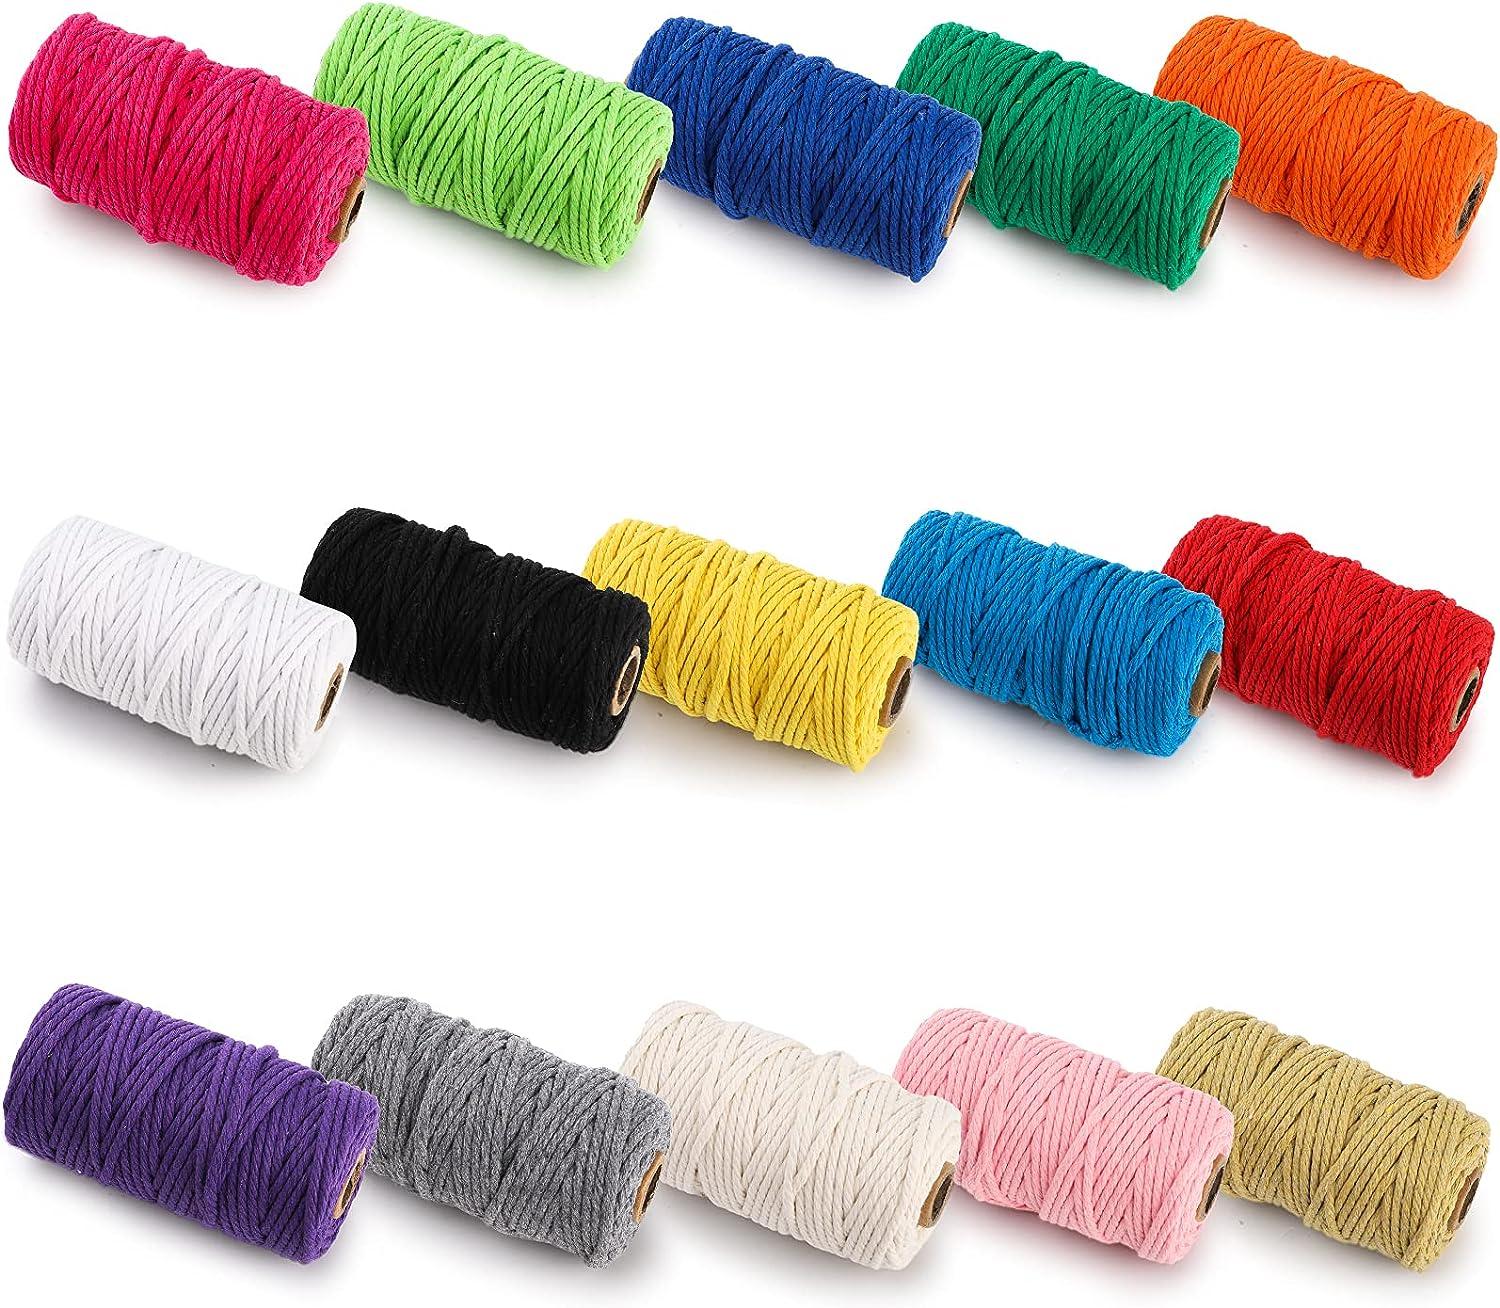 ZEAYEA 15 Rolls Macrame Cord 3mm x 480 Yards Natural Cotton Macrame Rope 4-Strand Twisted Soft Cotton Twine String Cord for Artworks Wall Hanging